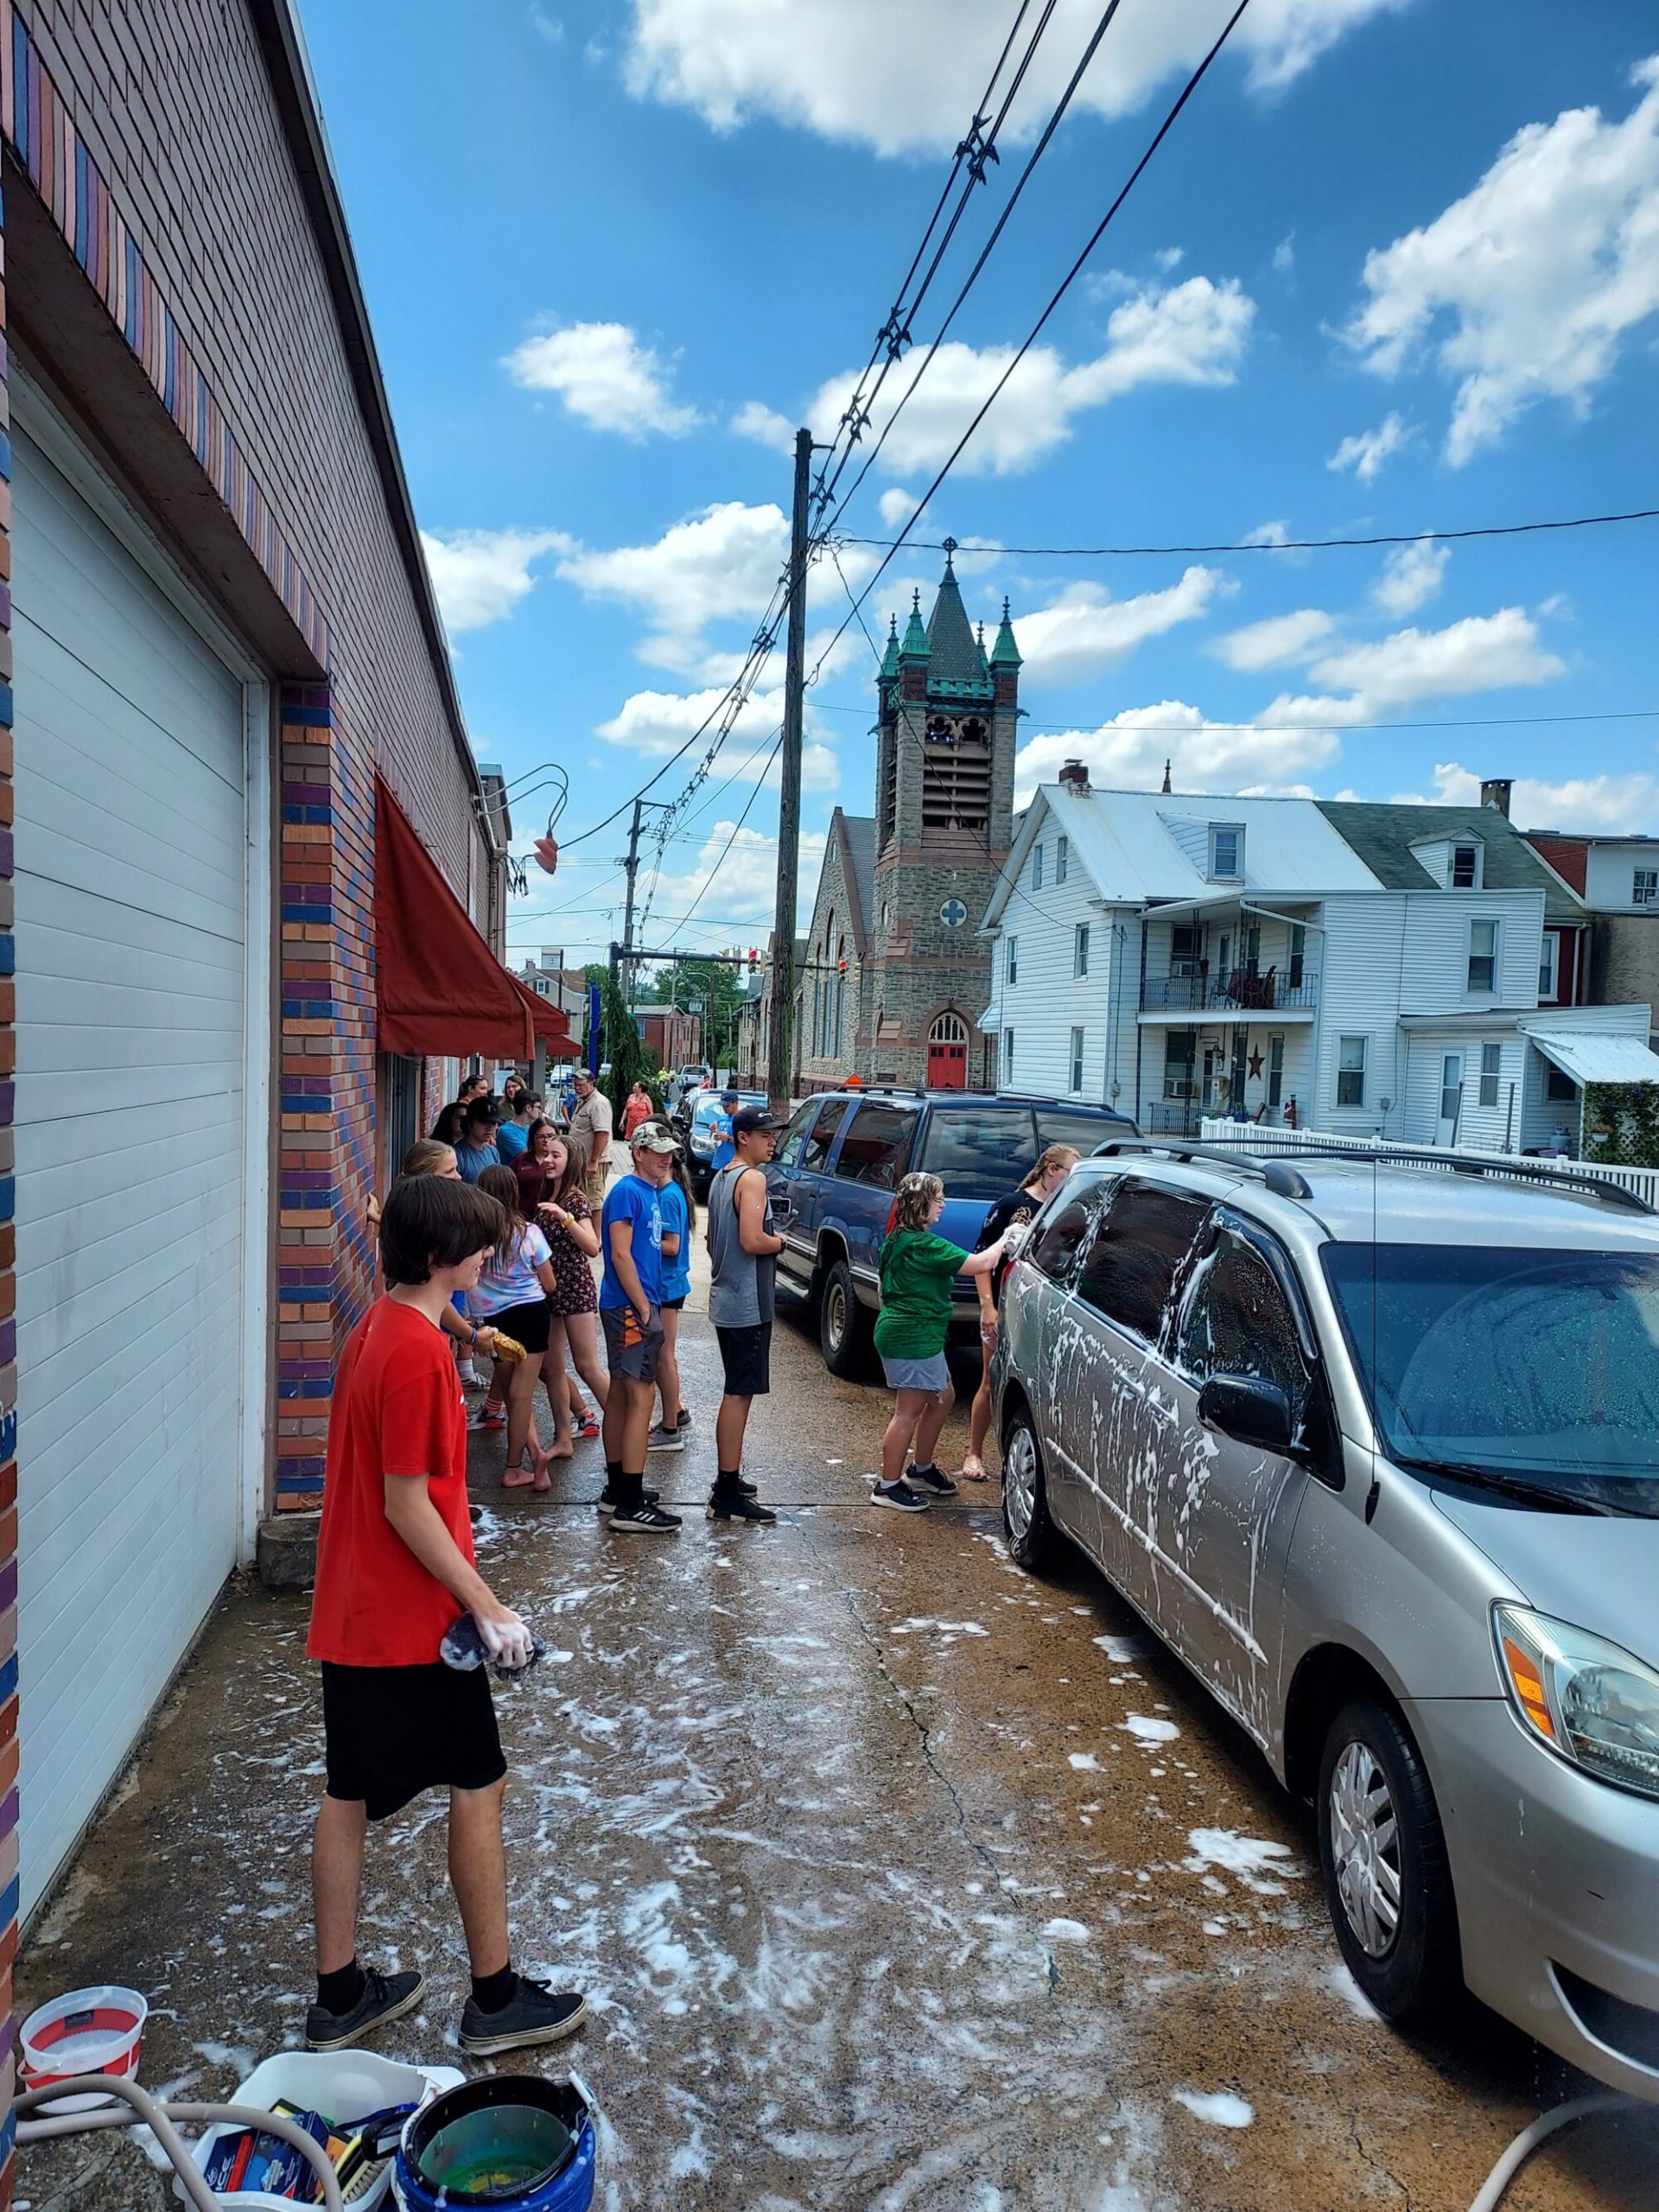 several teens standing on a sidewalk with car washing supplies